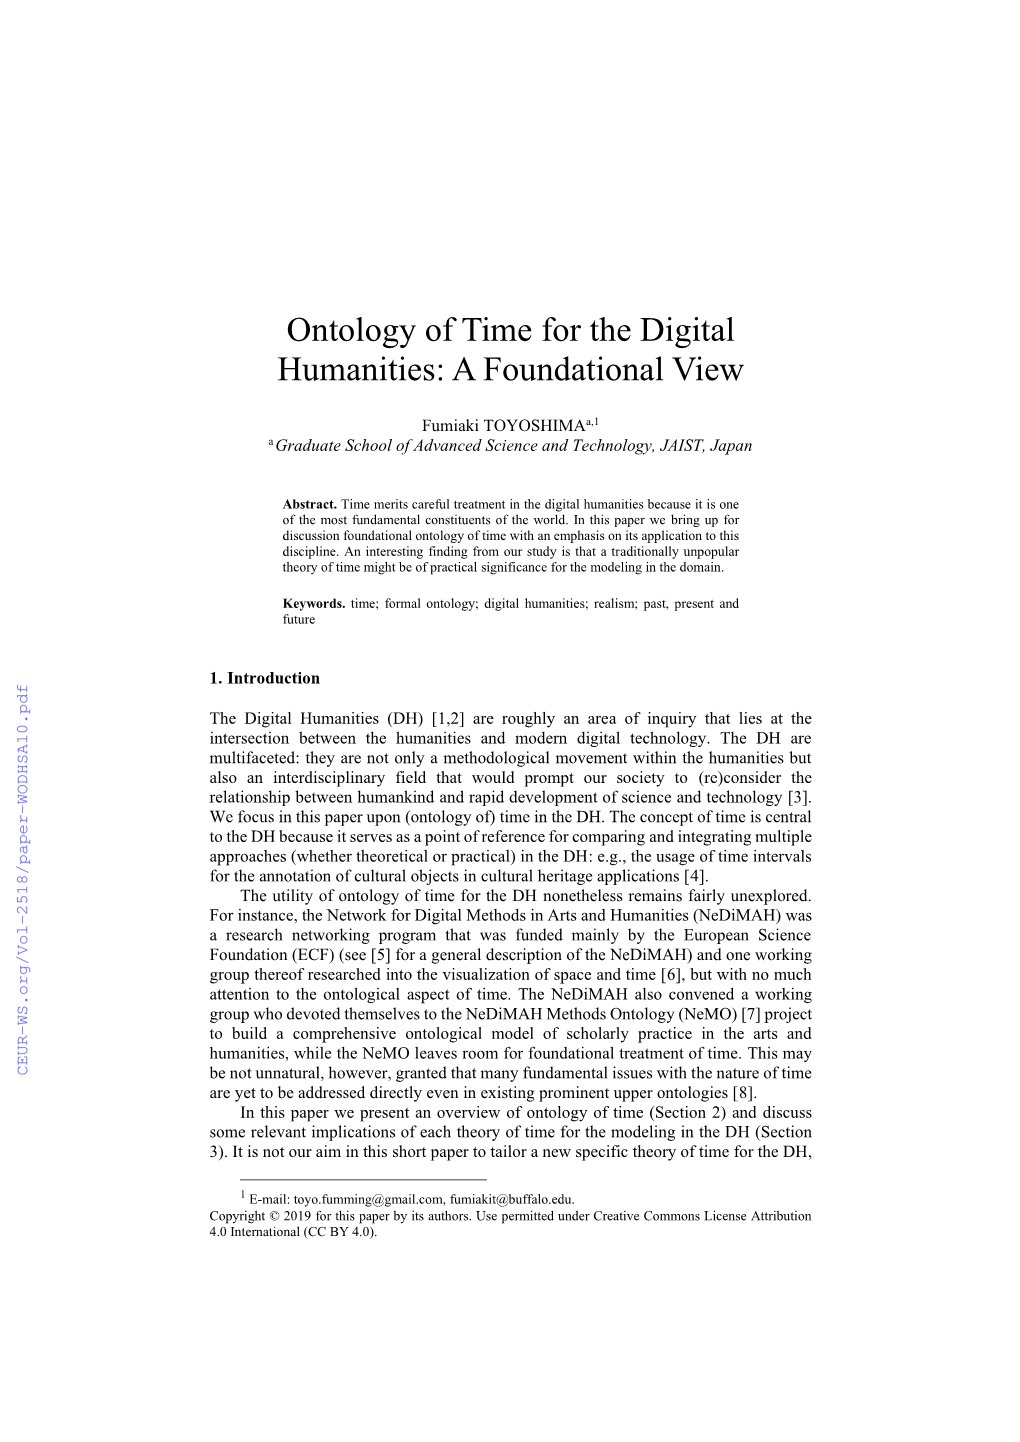 Ontology of Time for the Digital Humanities: a Foundational View